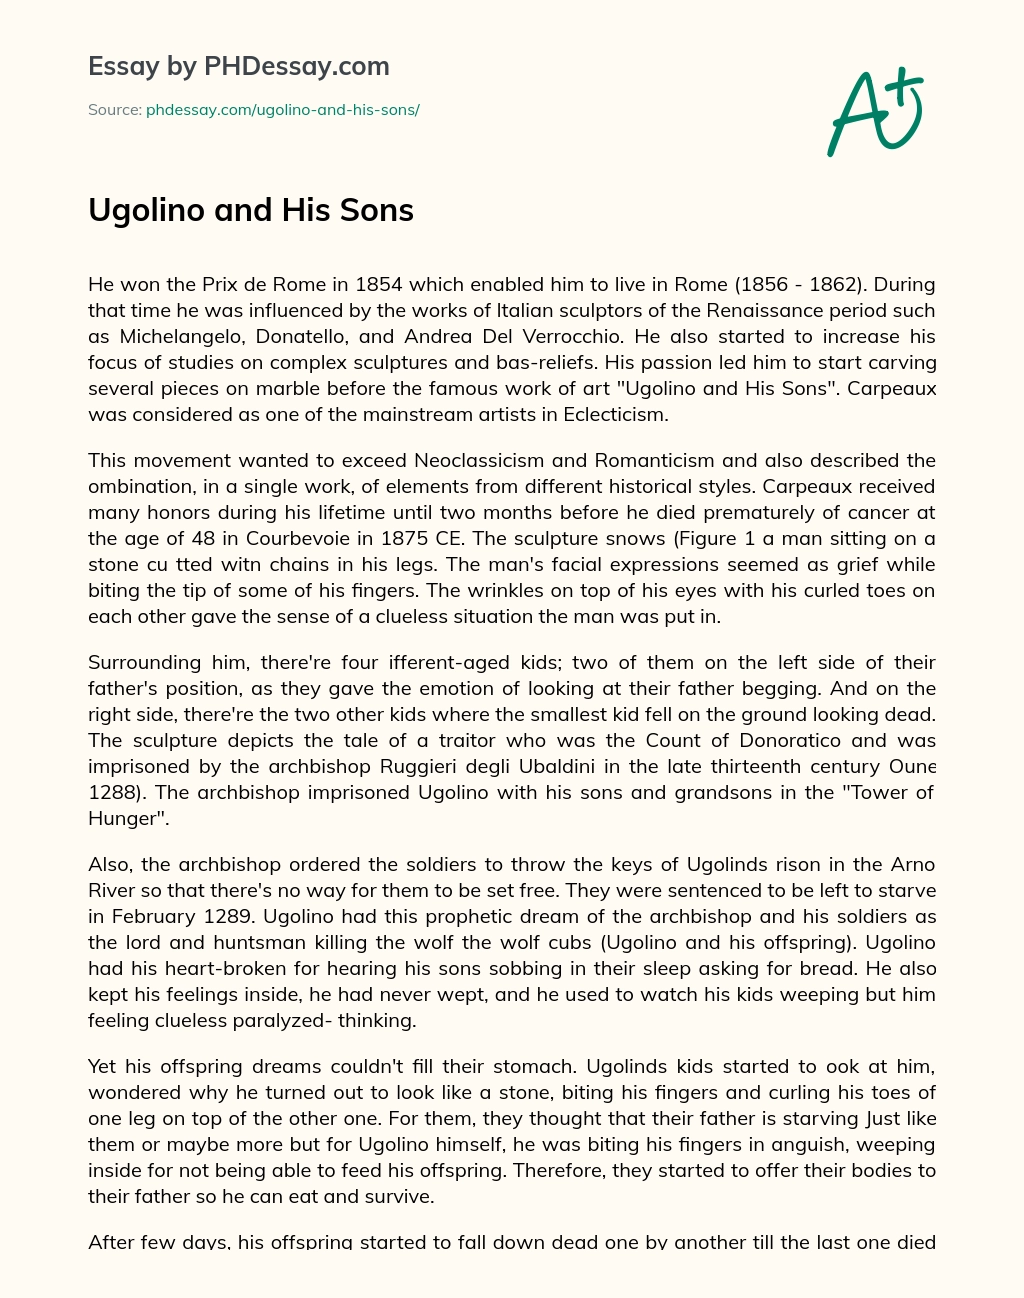 Ugolino and His Sons essay